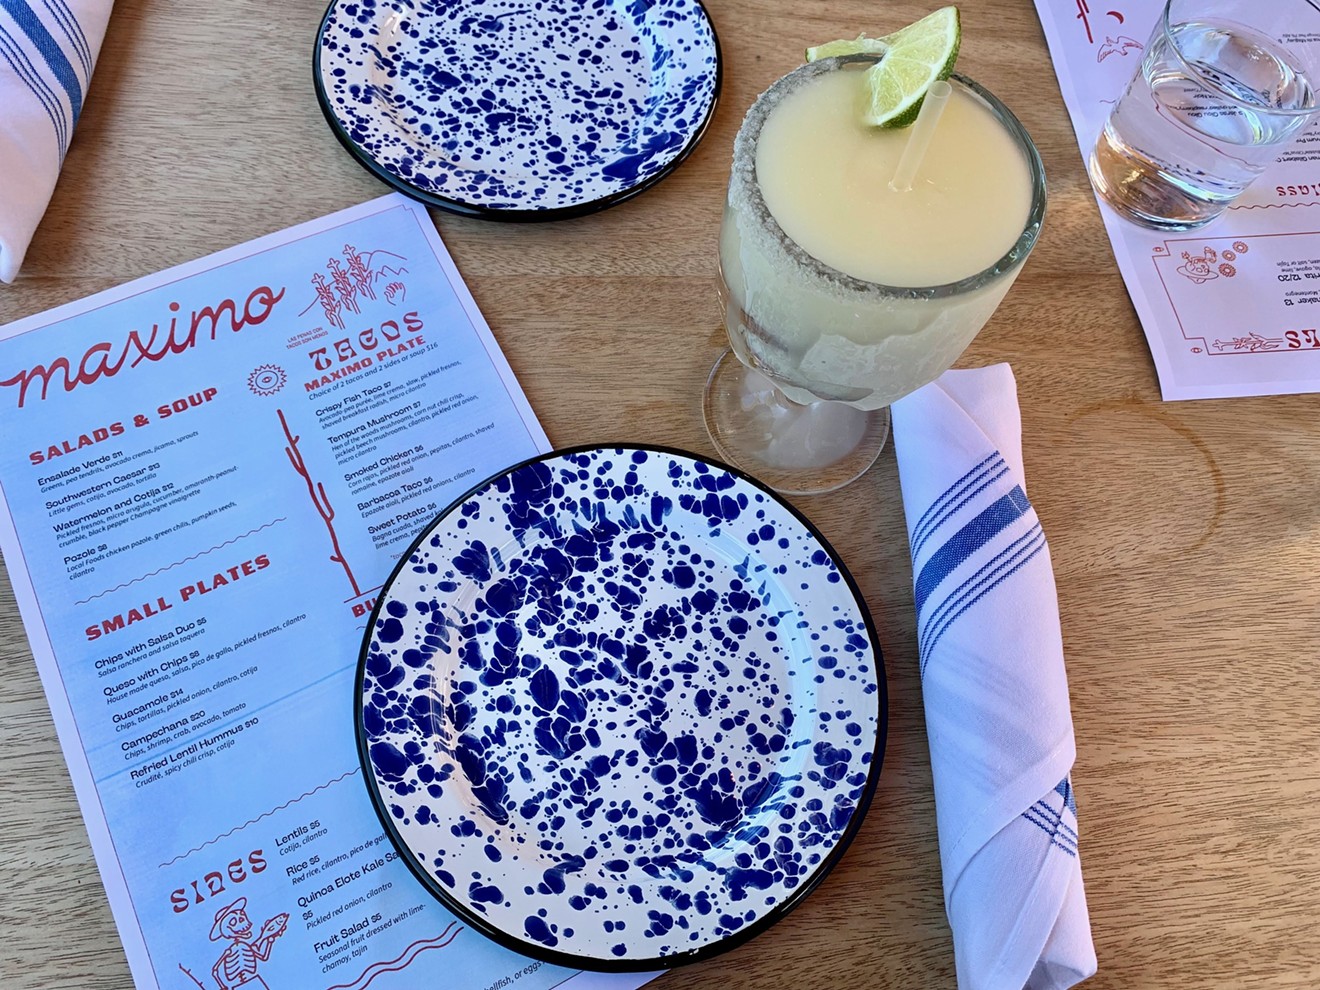 Nice napkins and pretty plates make a difference.